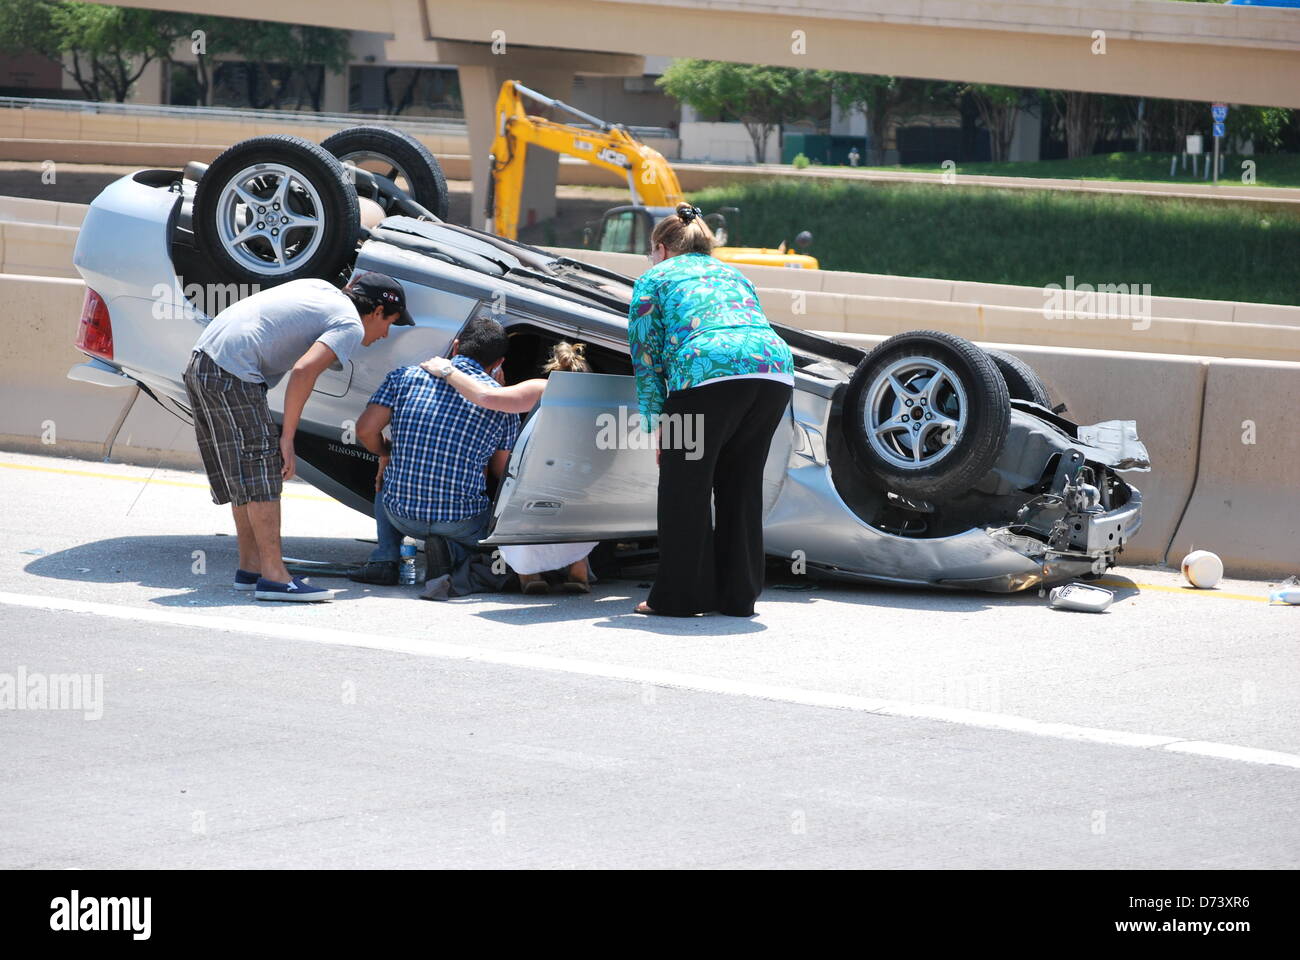 Dallas, TX, USA. 28 April 2013.  An injury accident on the West Bound Service Road  of the LBJ  Freeway at Blossomheath Ln. Credit: dallaspaparazzo/Alamy Live News Stock Photo